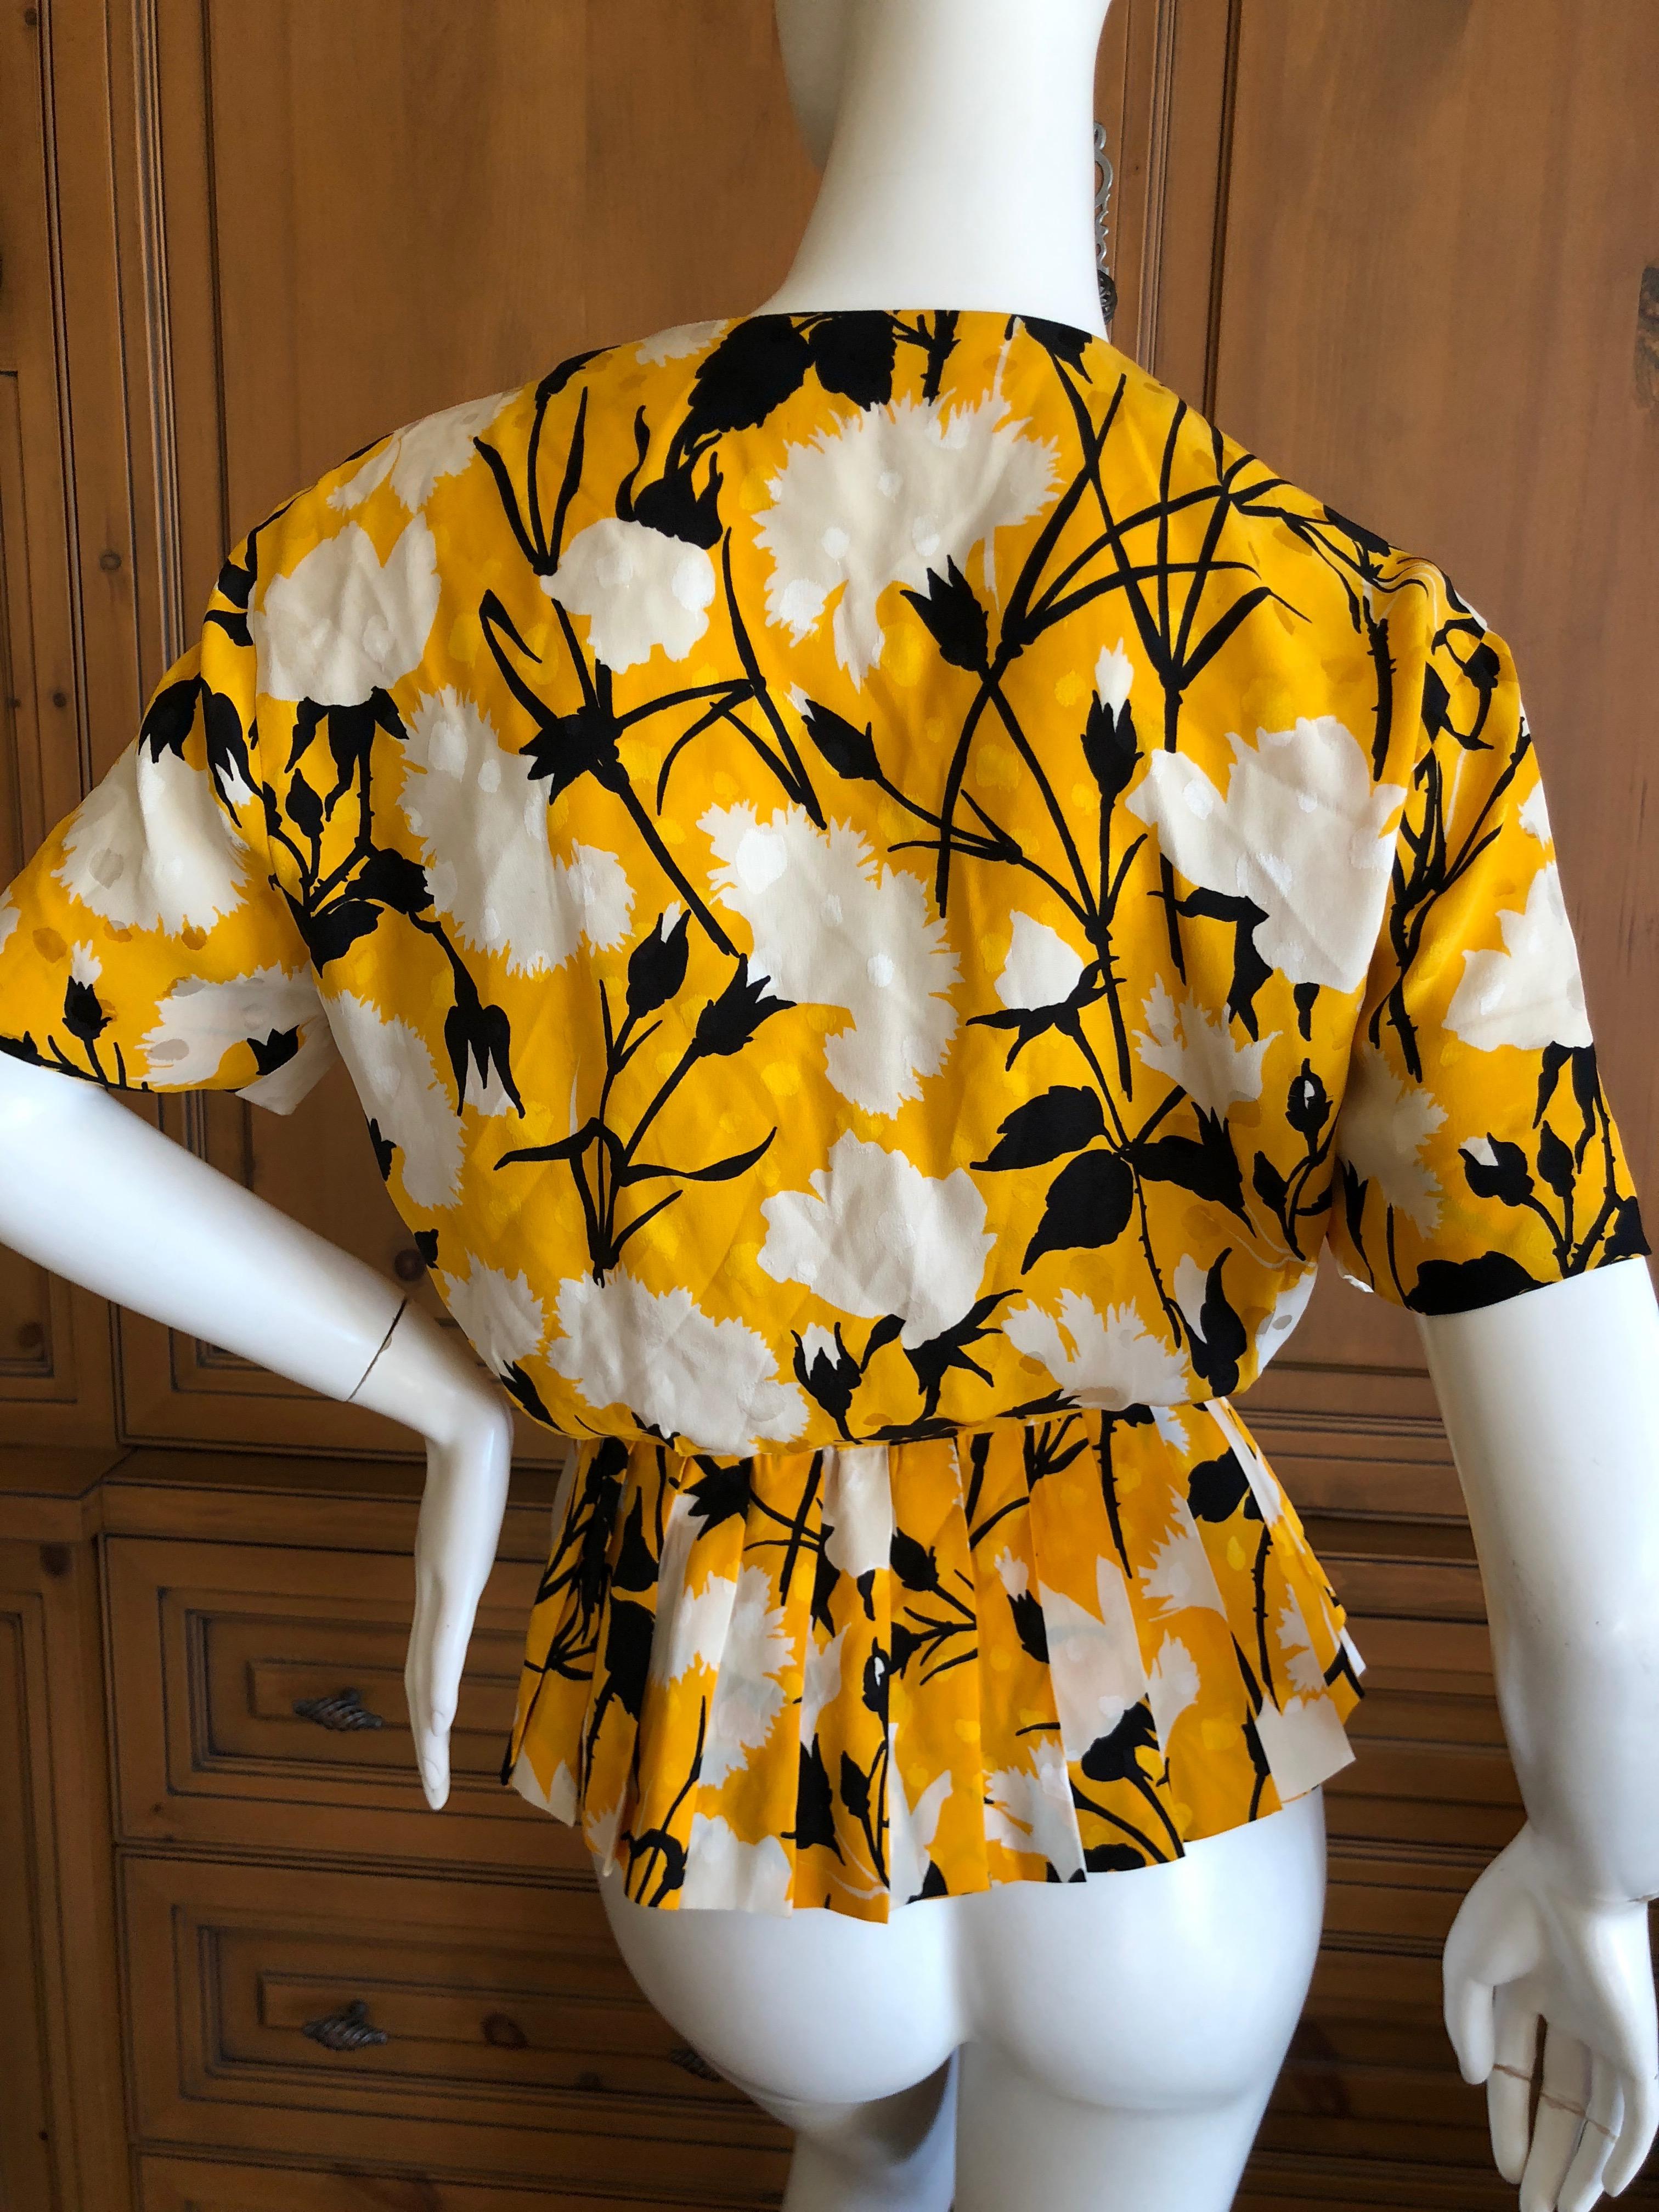 Christian Dior by Gianfranco Ferre Blossom Pattern Silk Top with Pleated Peplum For Sale 3